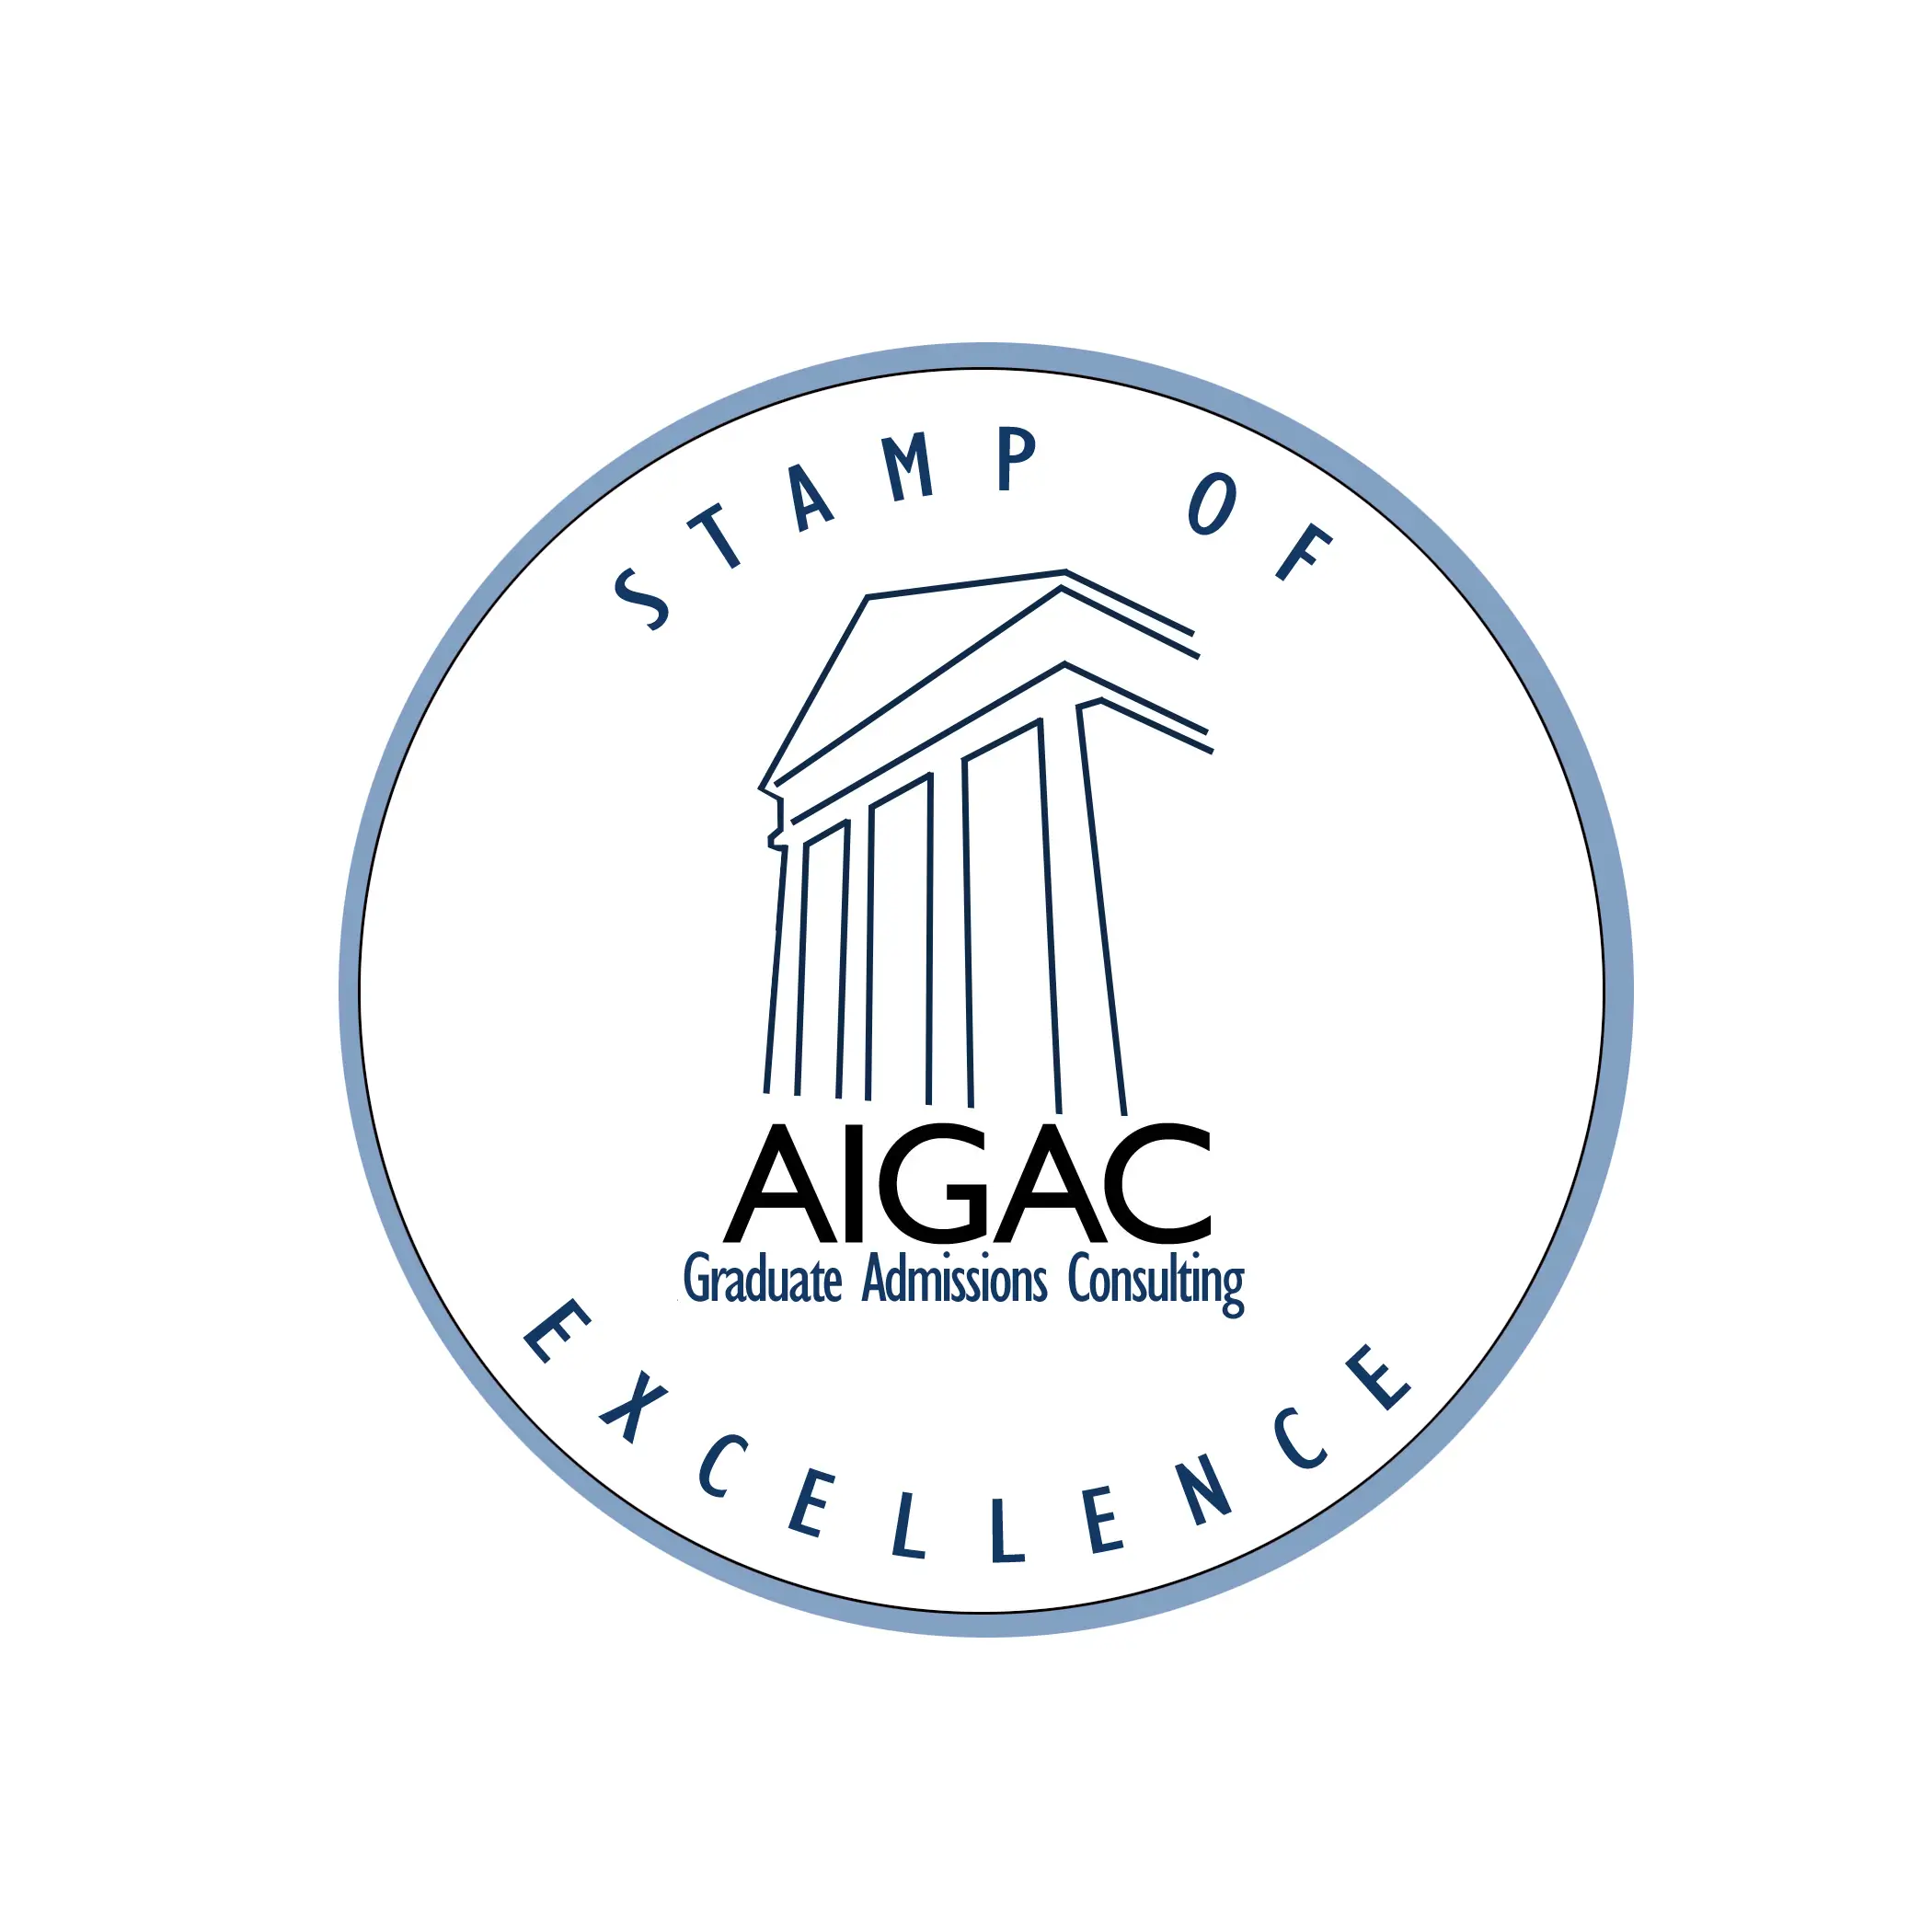 AIGAC Stamp of Excellence